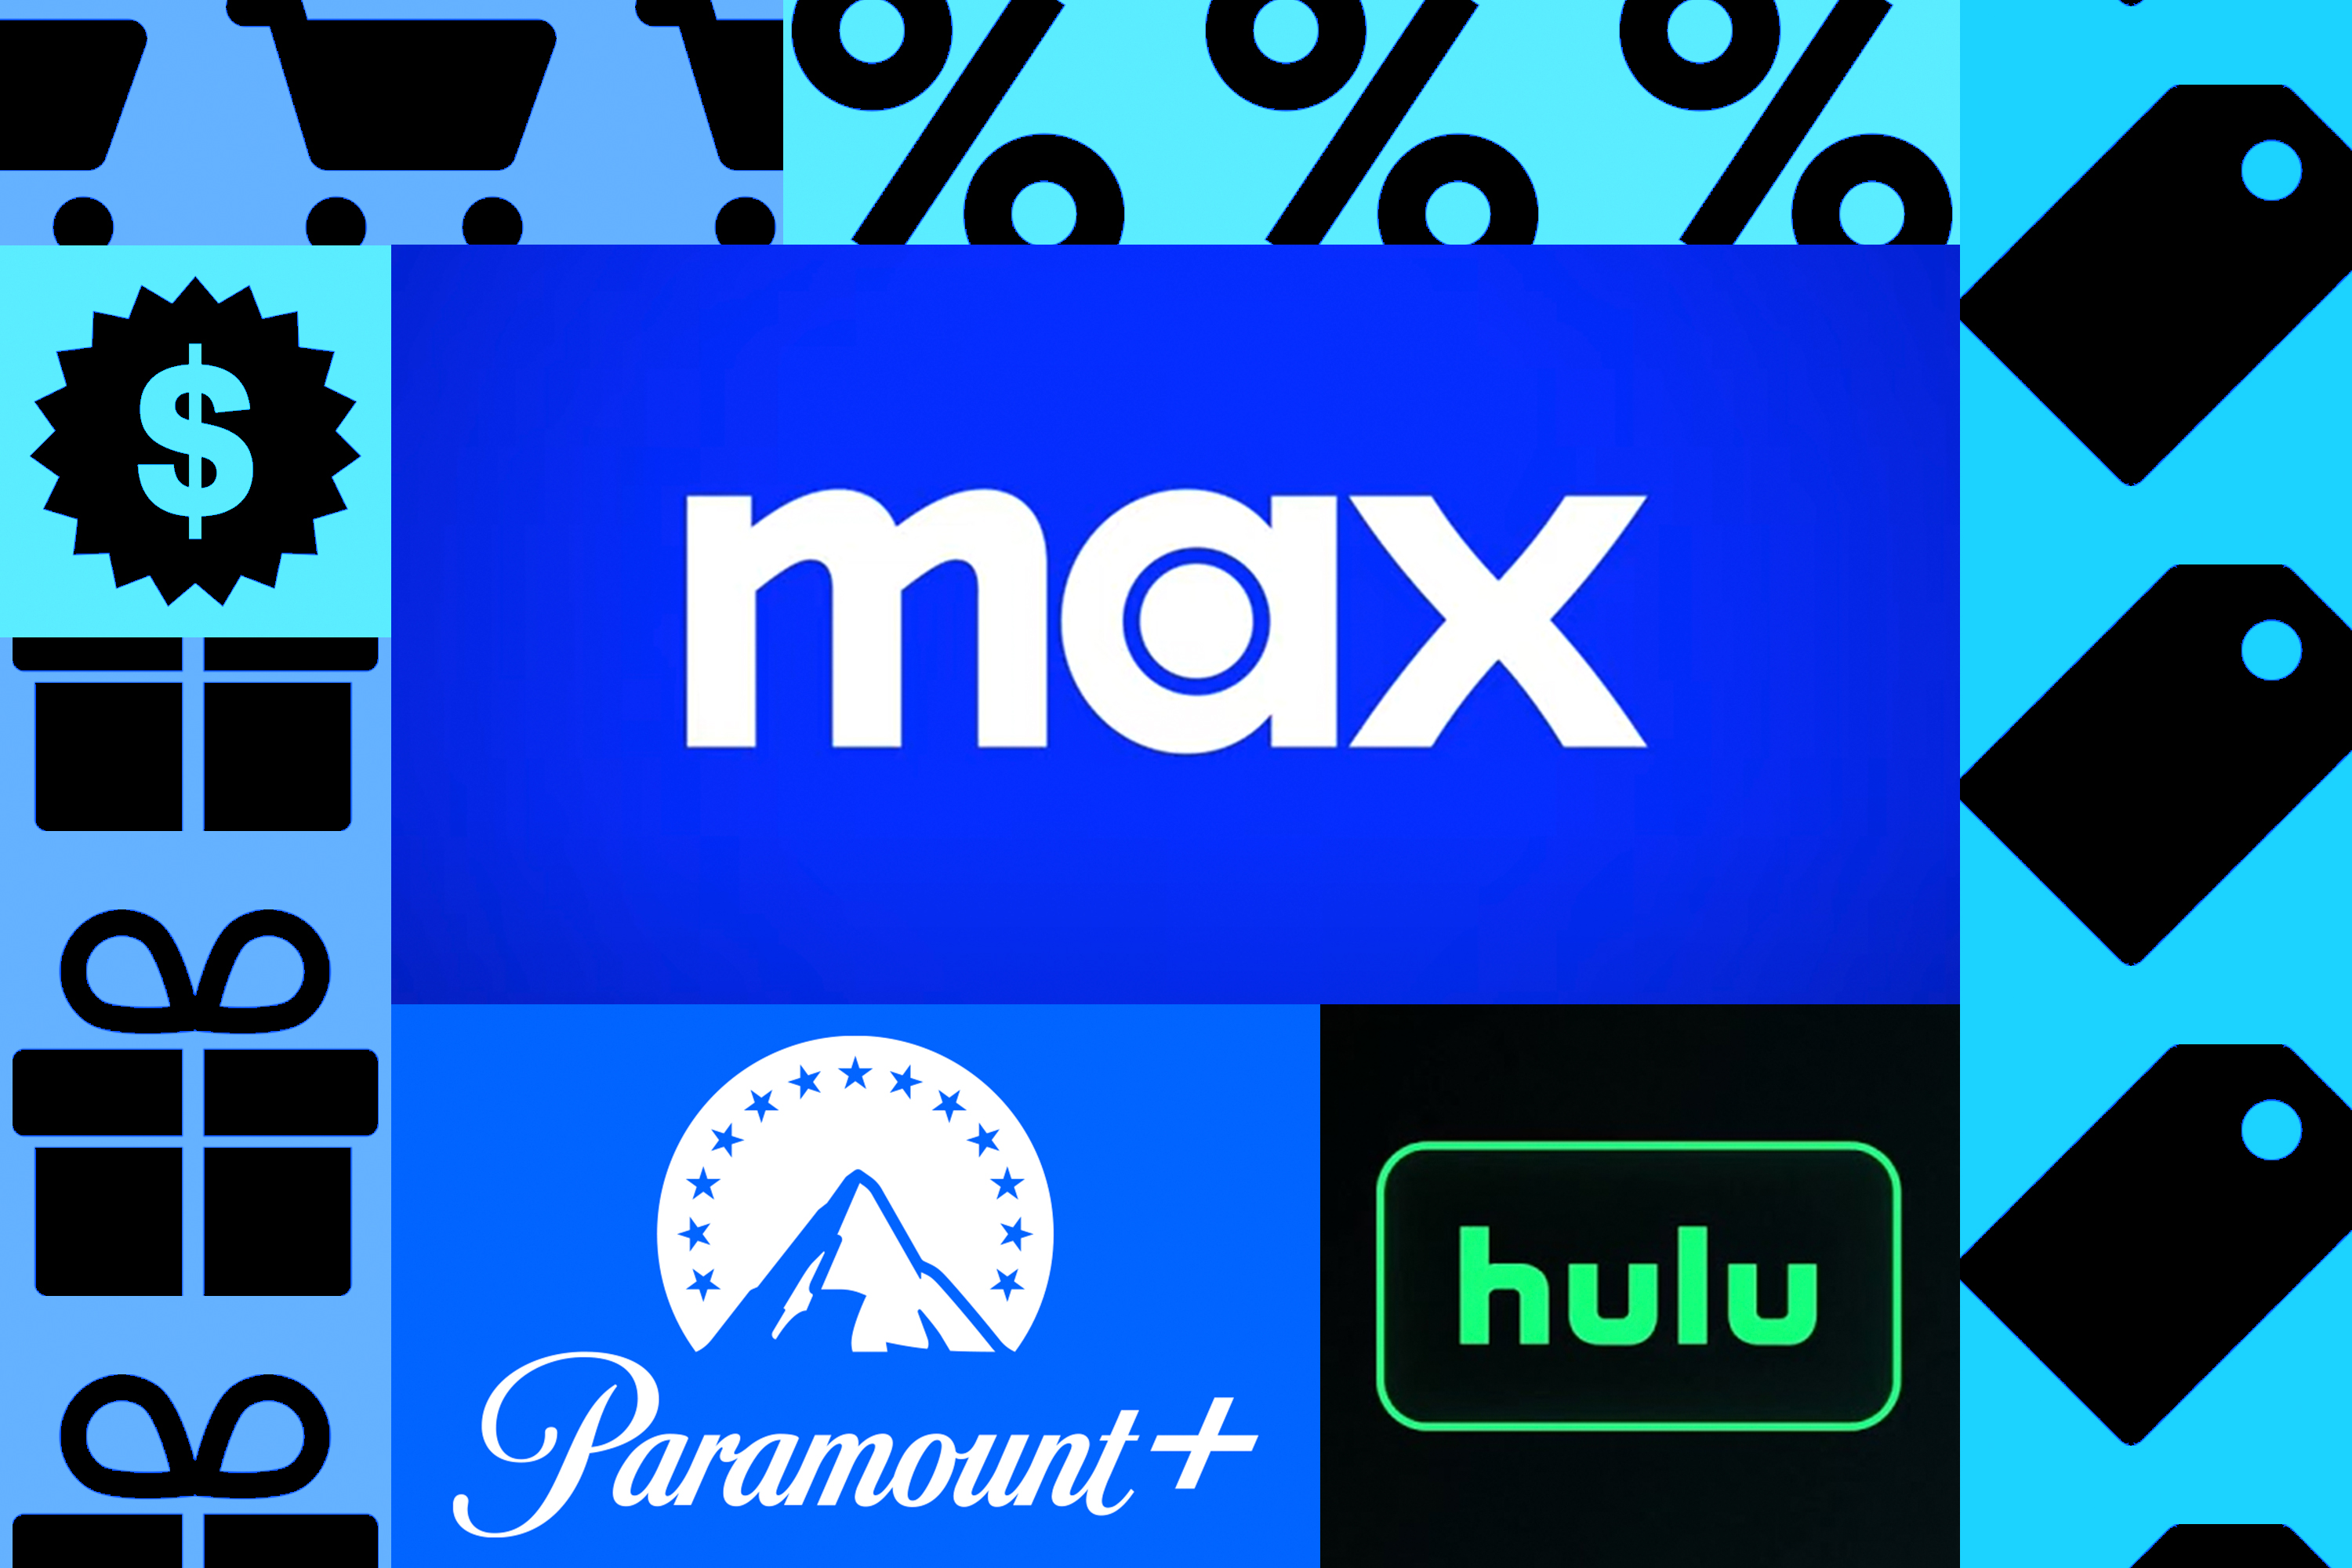 A composition of the logos for Max, Paramount Plus, and Hulu on an original background